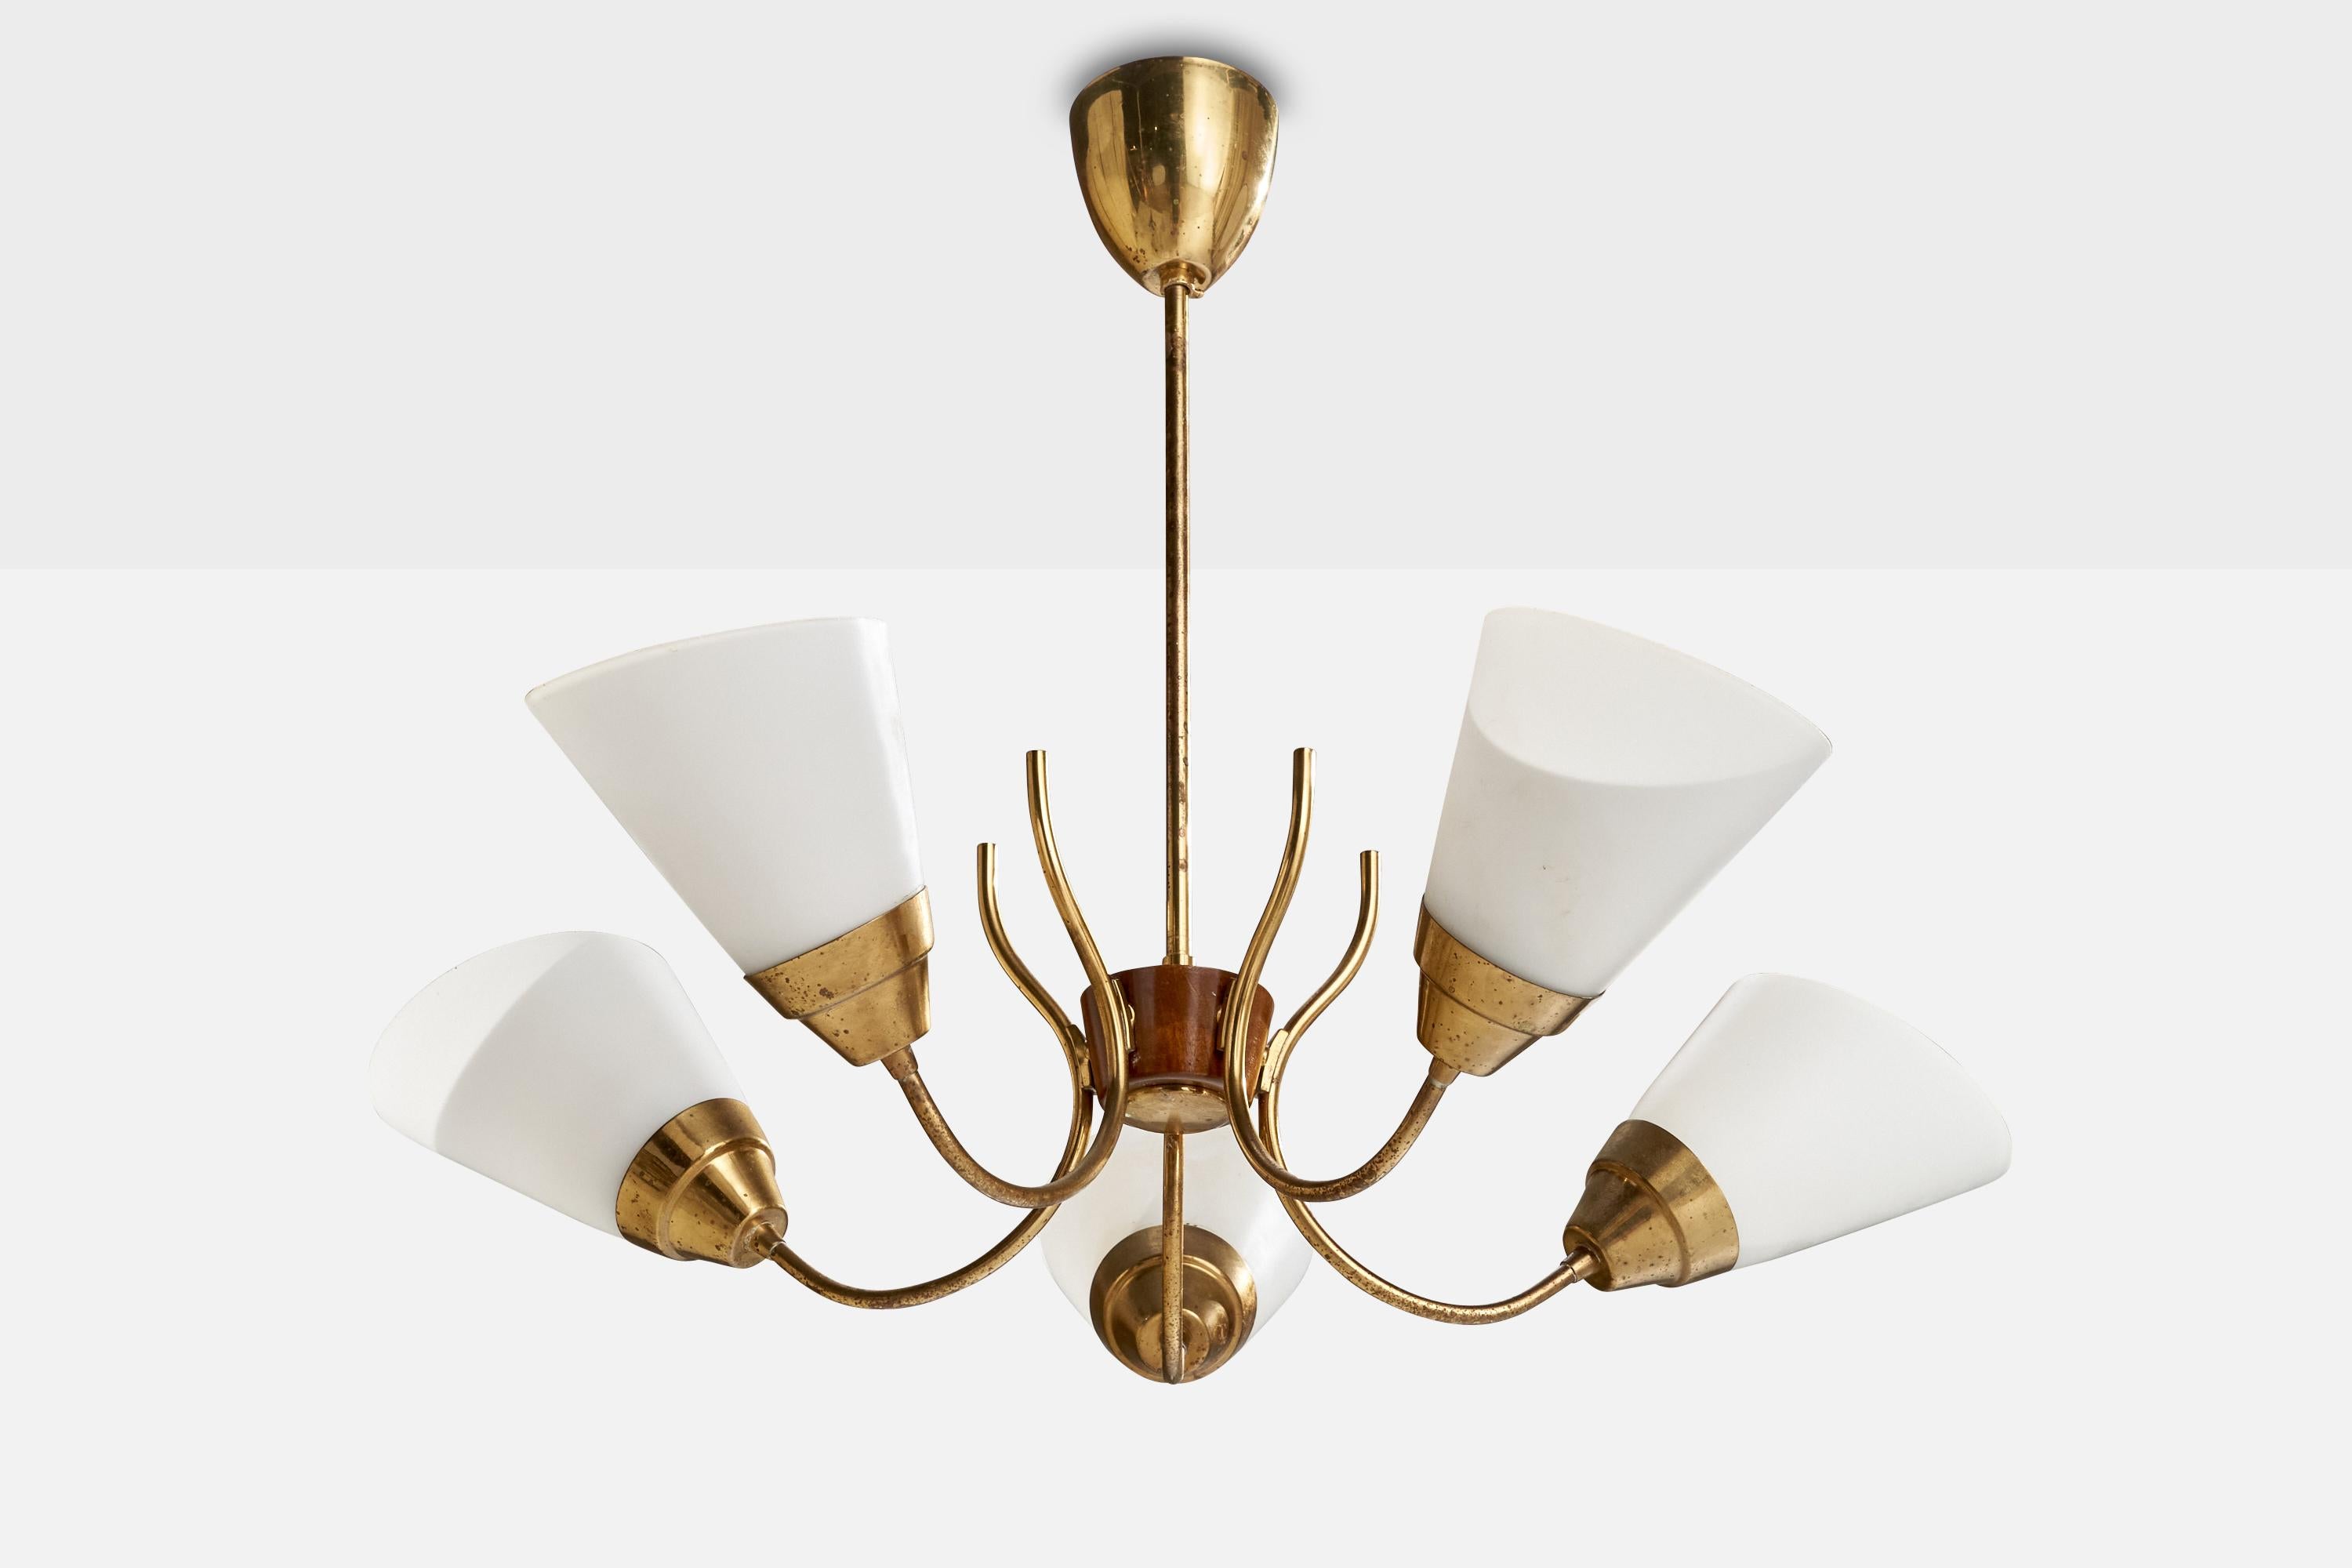 A brass, teak and opaline glass chandelier designed and produced in Sweden, c. 1950s.

Dimensions of canopy (inches): 3.45” H x 3.38” Diameter
Socket takes standard E-26 bulbs. 5 socket.There is no maximum wattage stated on the fixture. All lighting